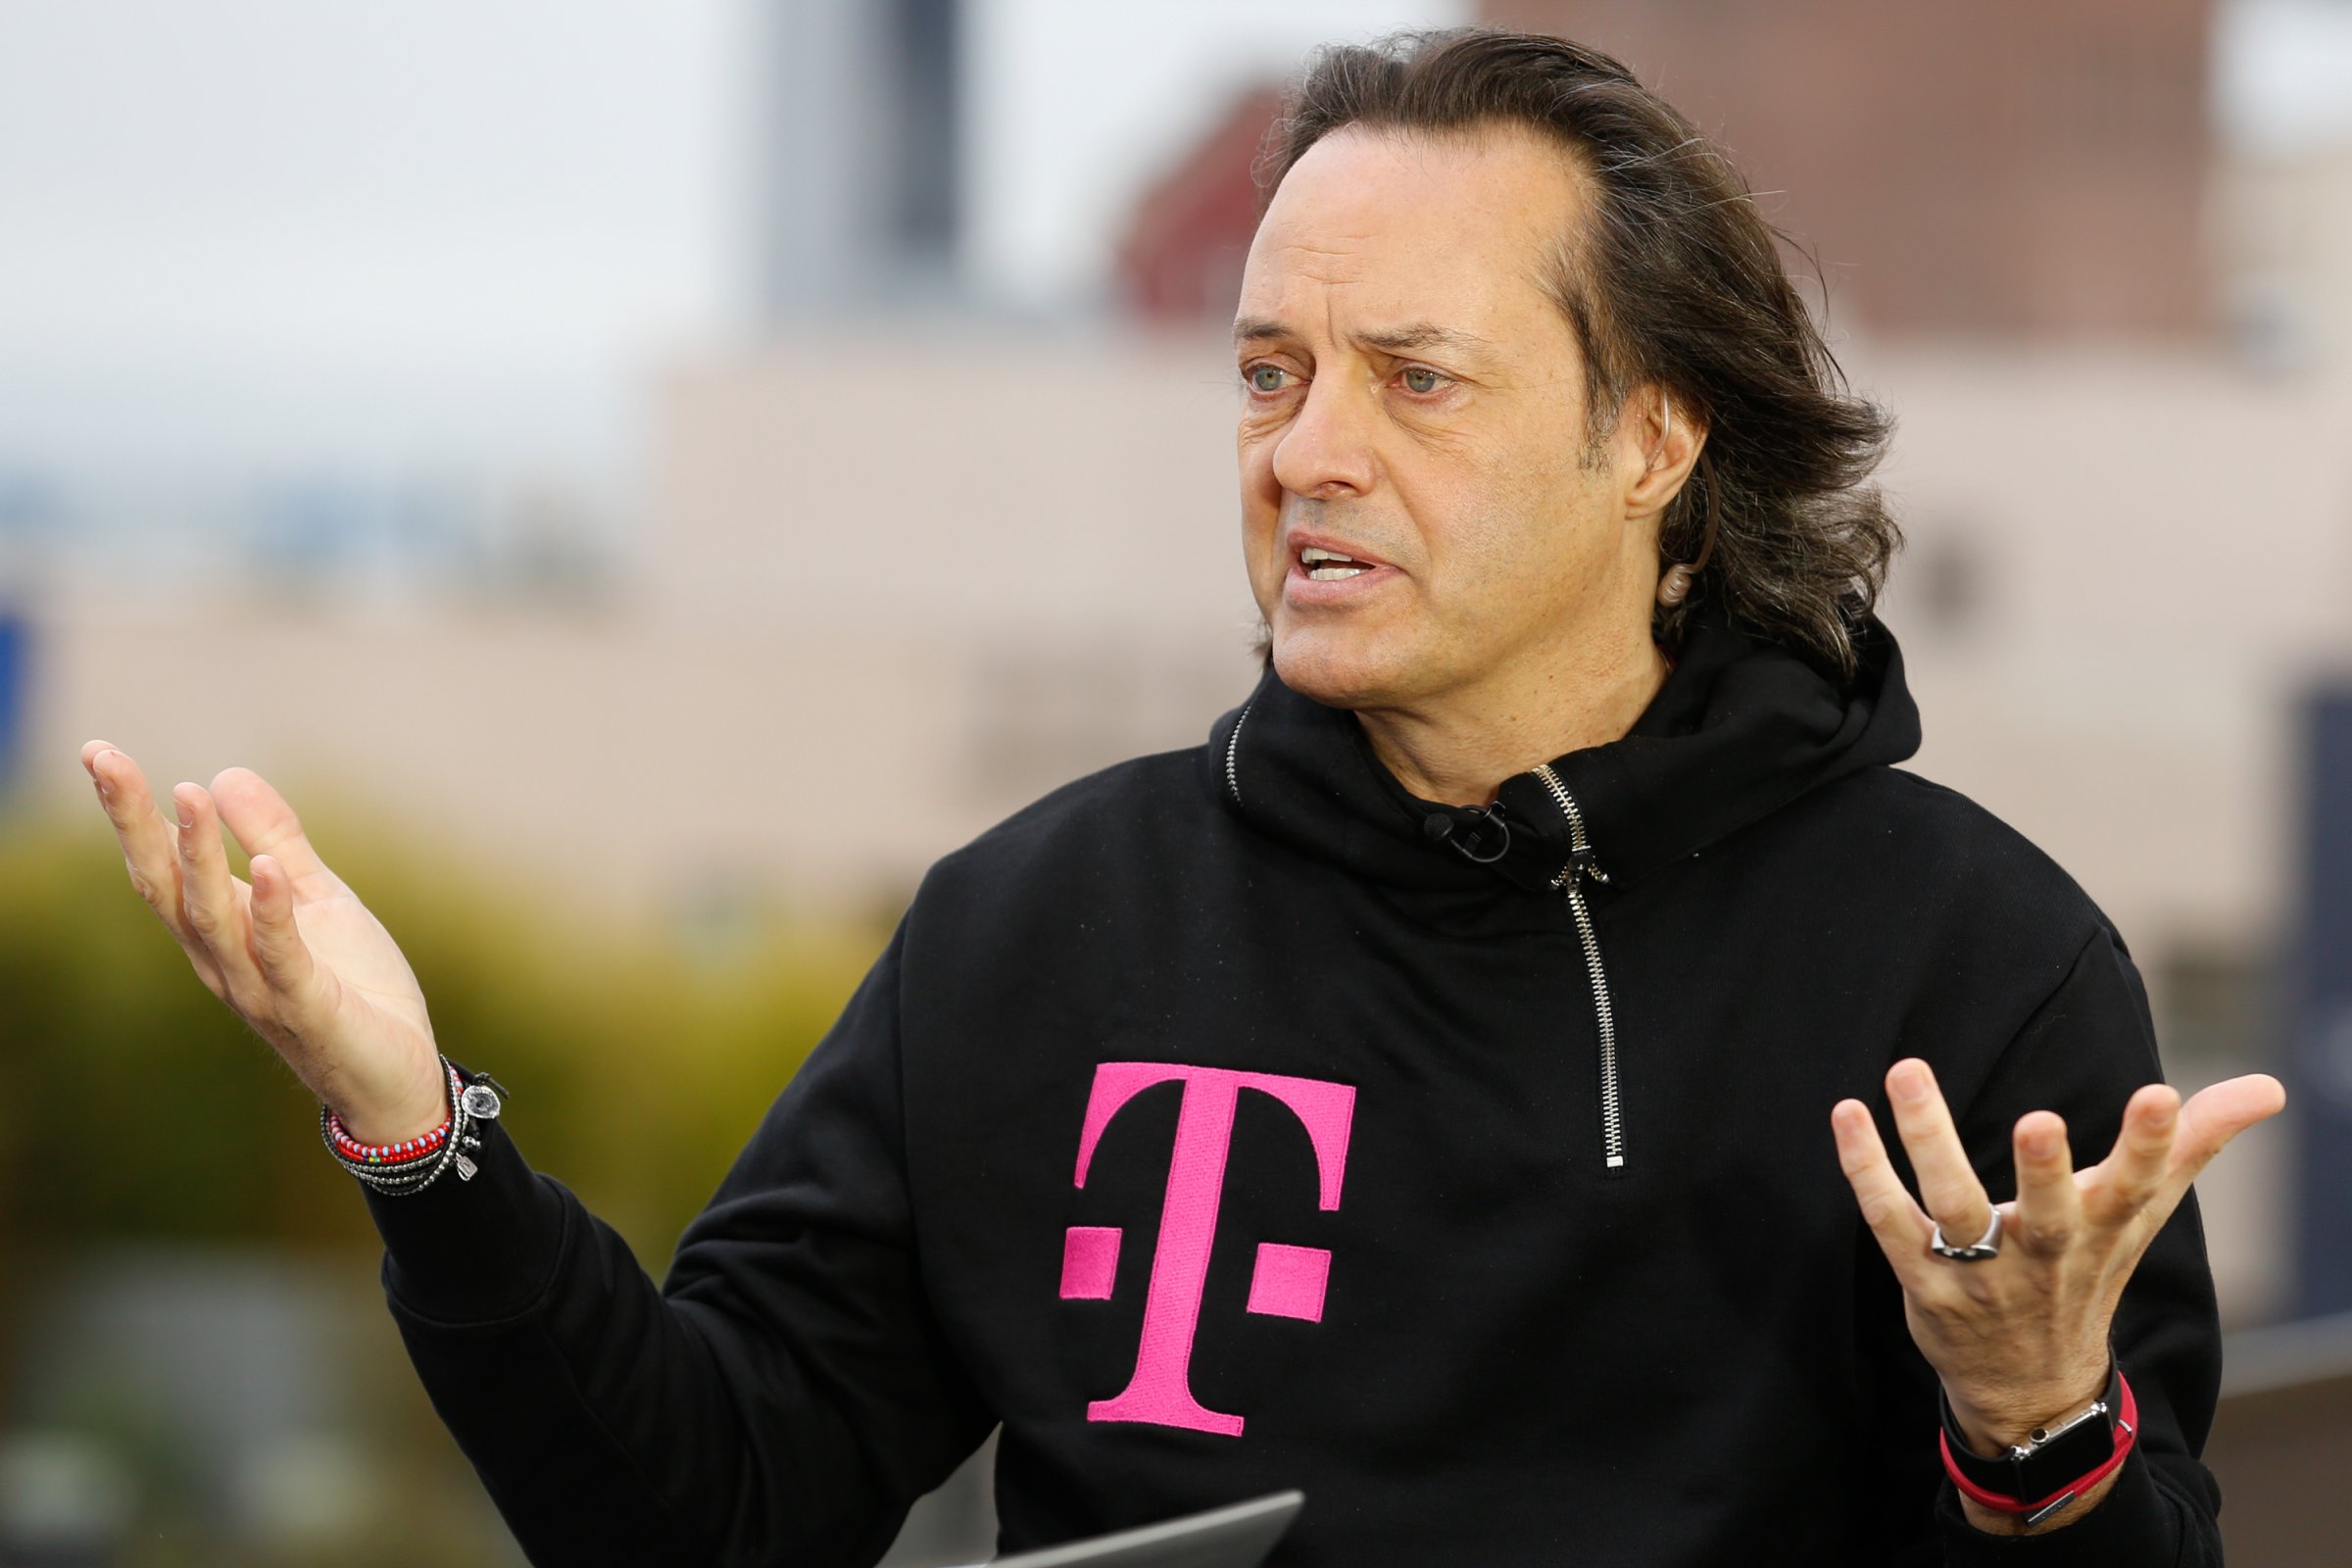 SQUAWK ALLEY -- Pictured: John Legere, CEO and  President of T-Mobile US, in an interview at CNBC's San Francicso bureau, on April 28, 2015 -- (Photo by: David A.Grogan/CNBC/NBCU Photo Bank)